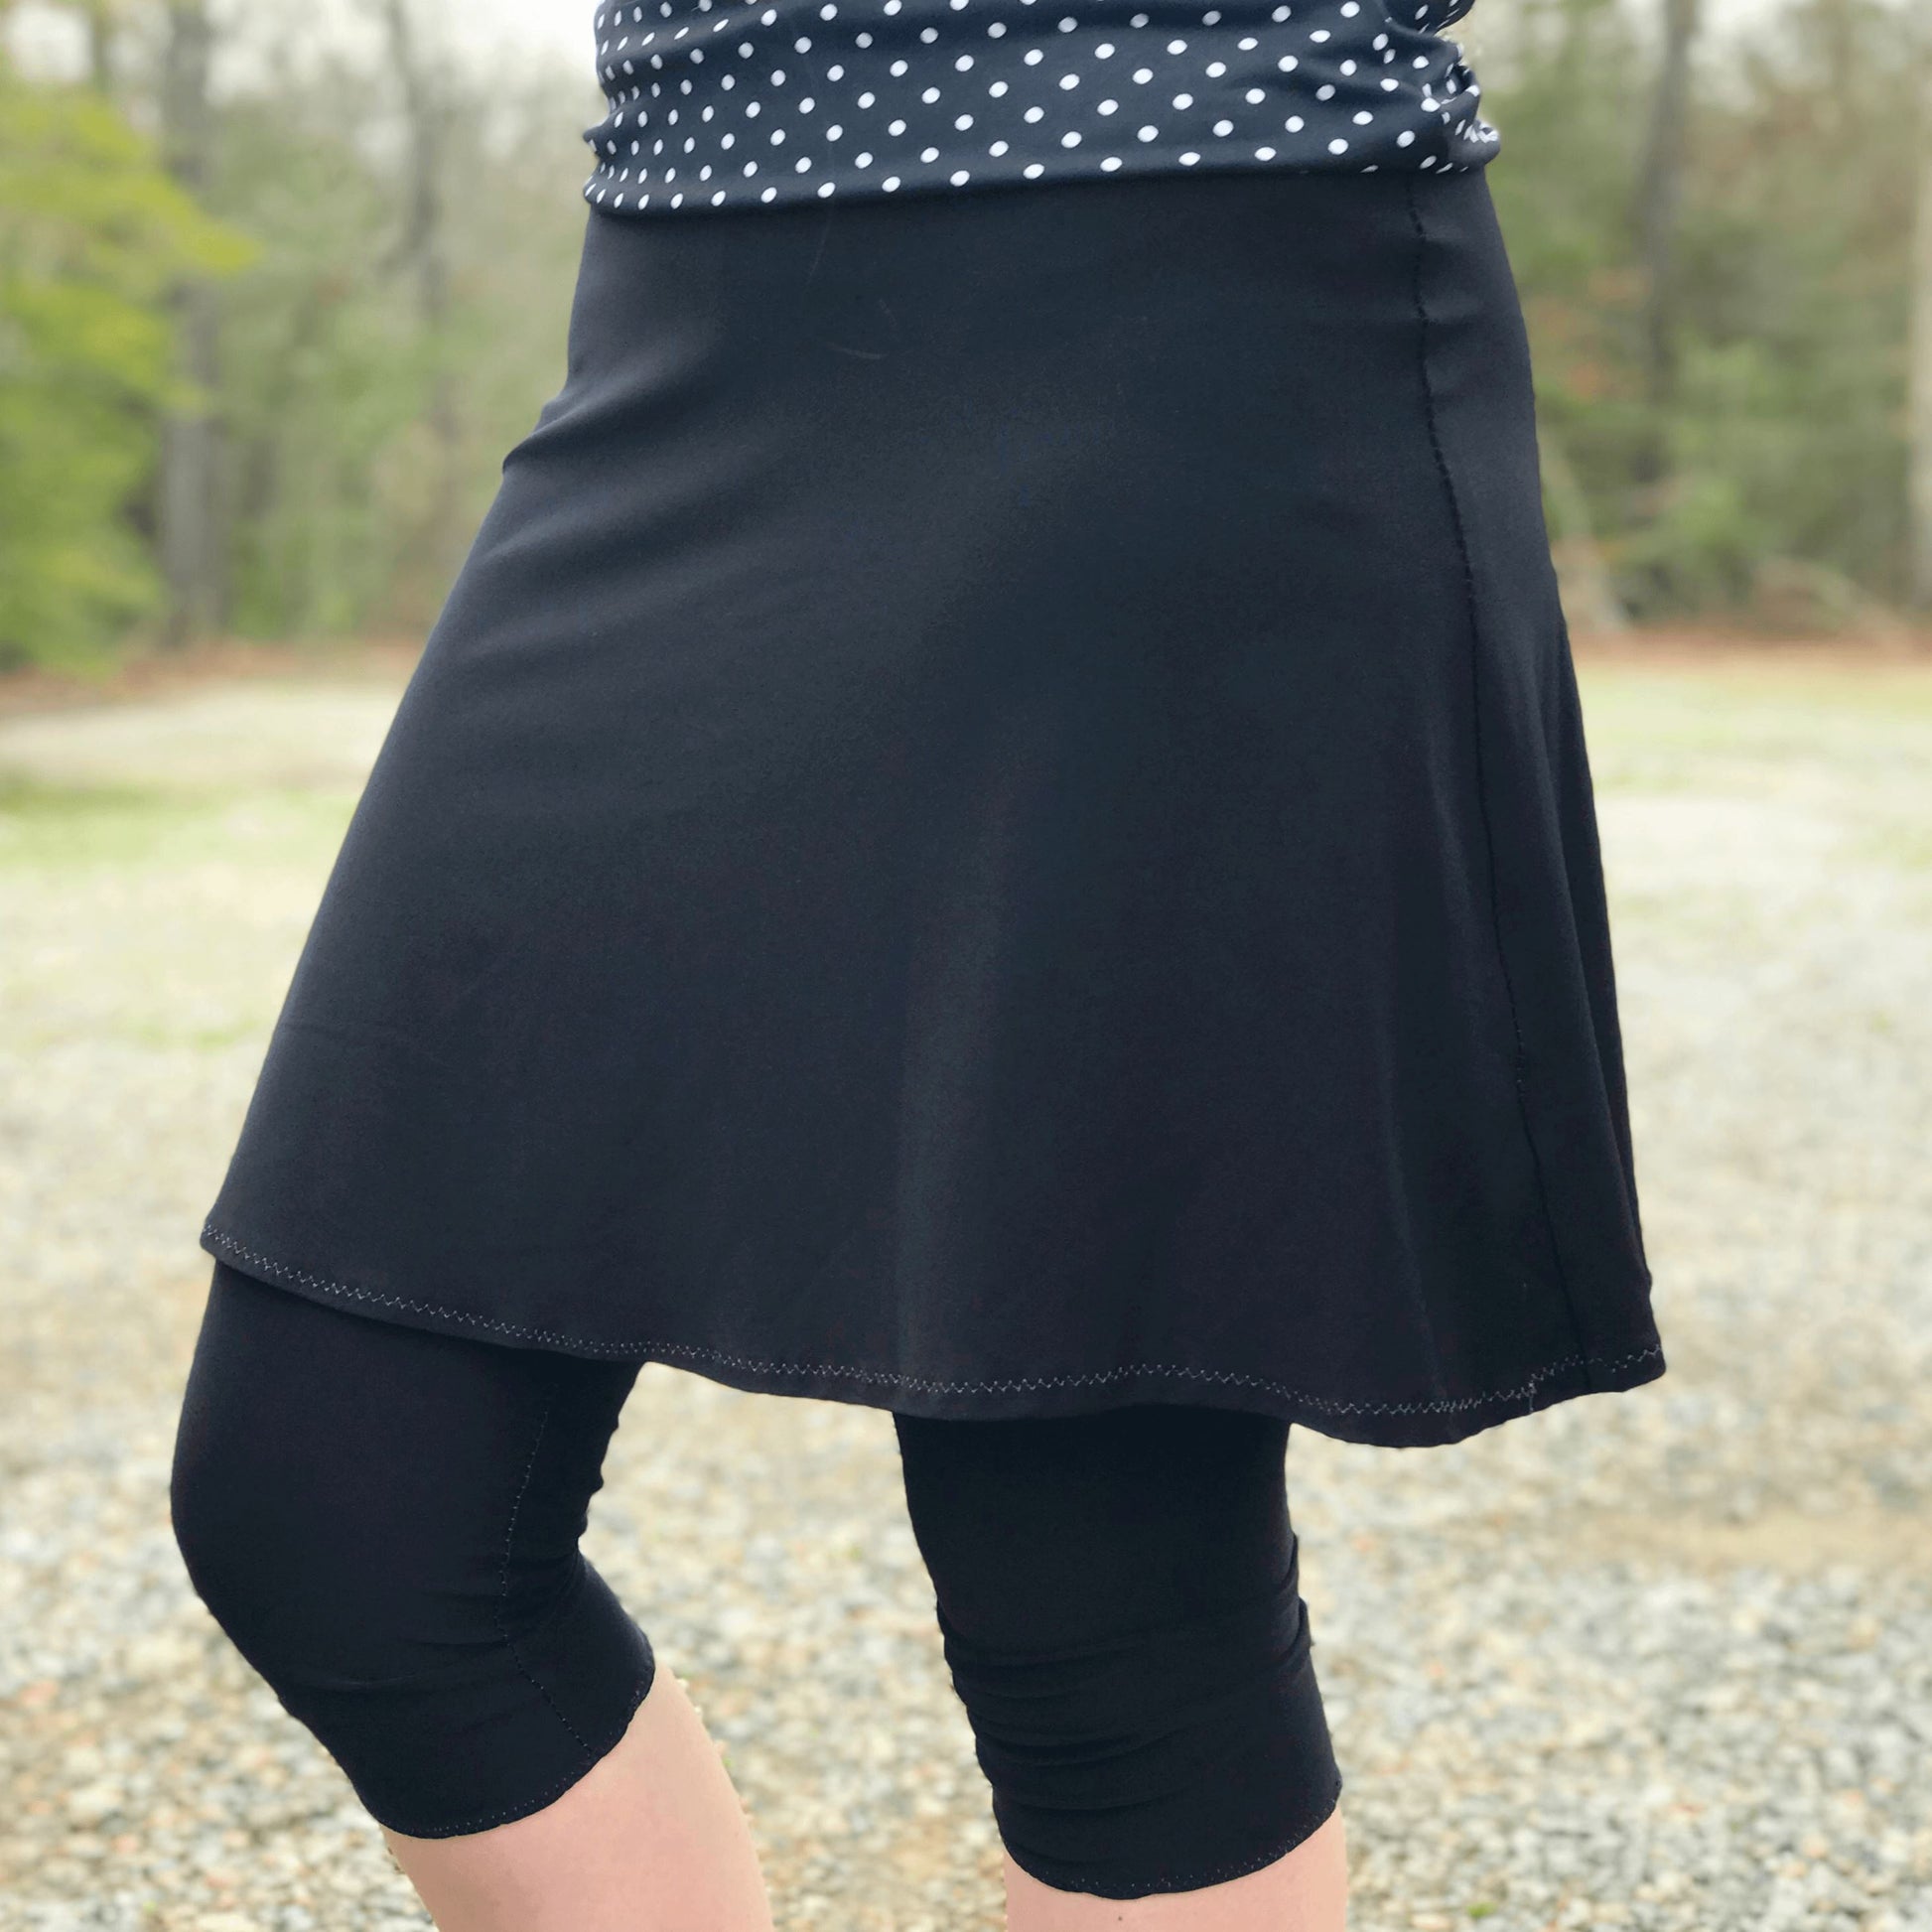 SWIM SKIRT With Attached Leggings Modest Active Swimwear Provides Modest UV  Coverage for Swimwear and Sportswear. 